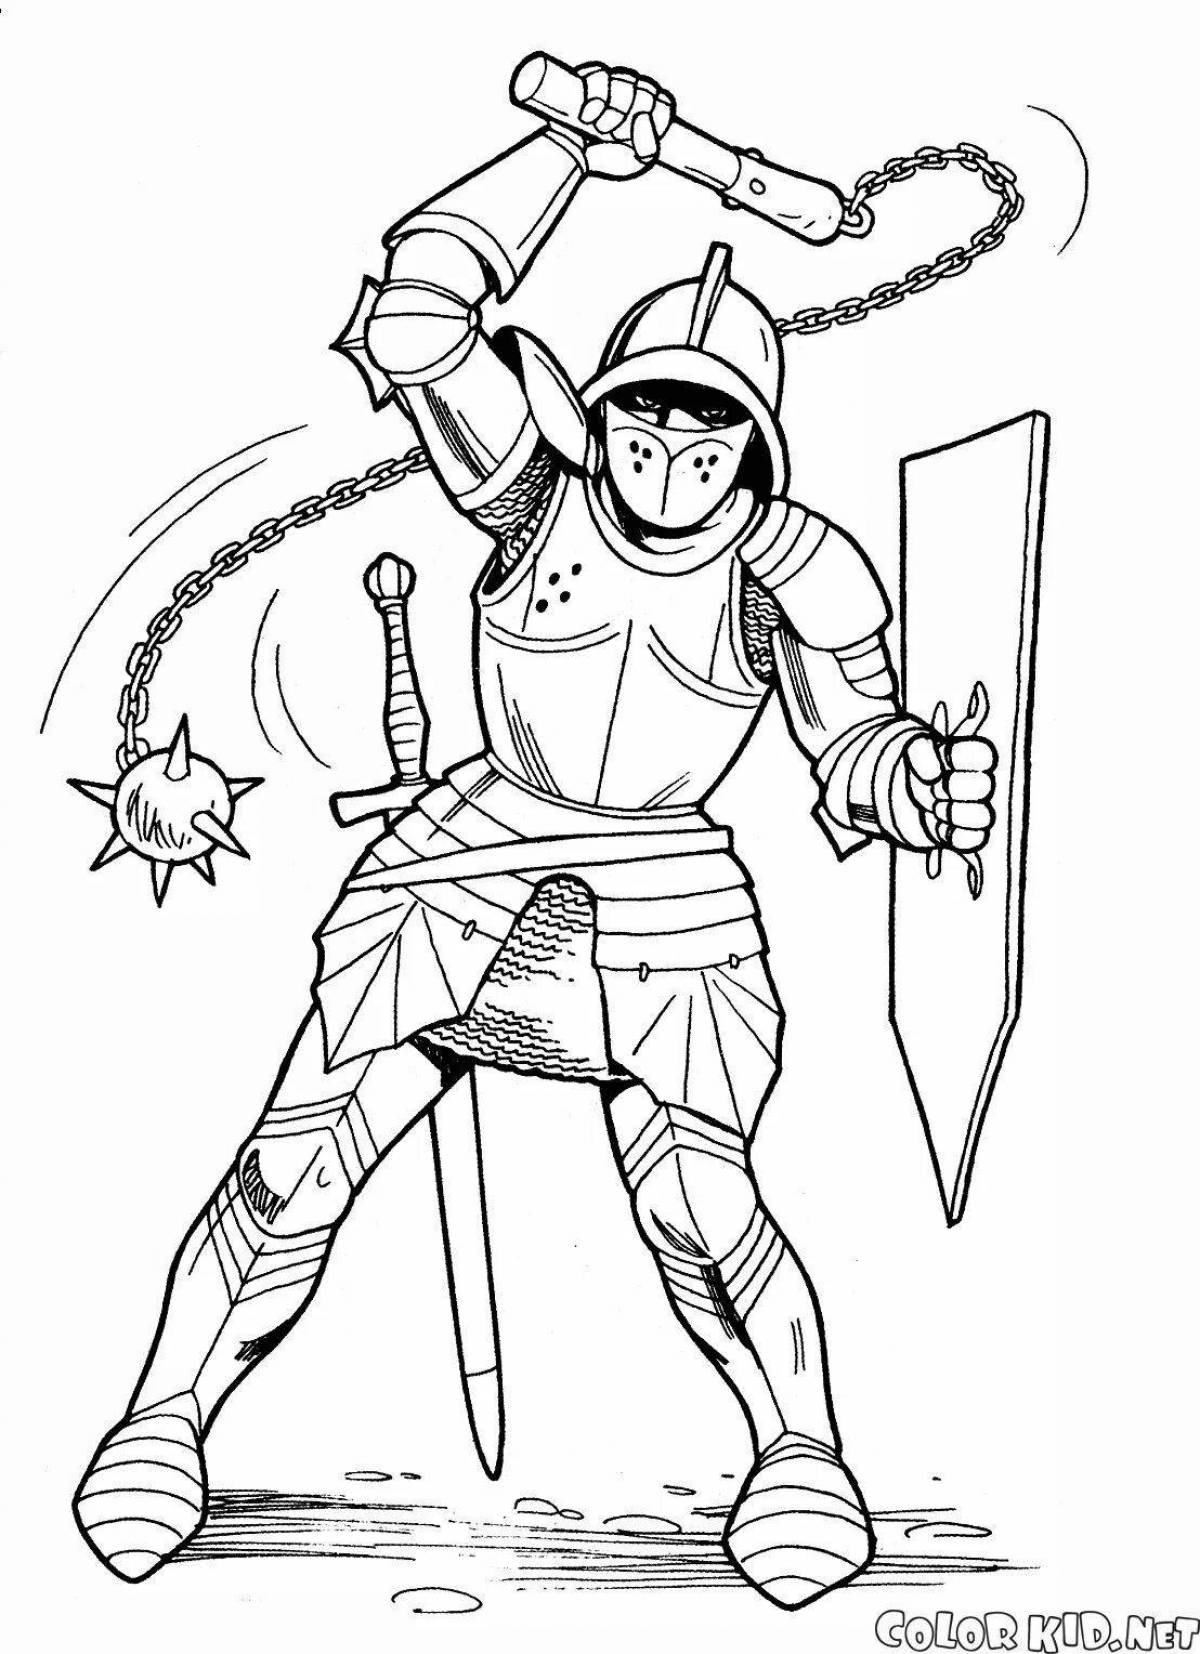 Strong Warrior coloring page